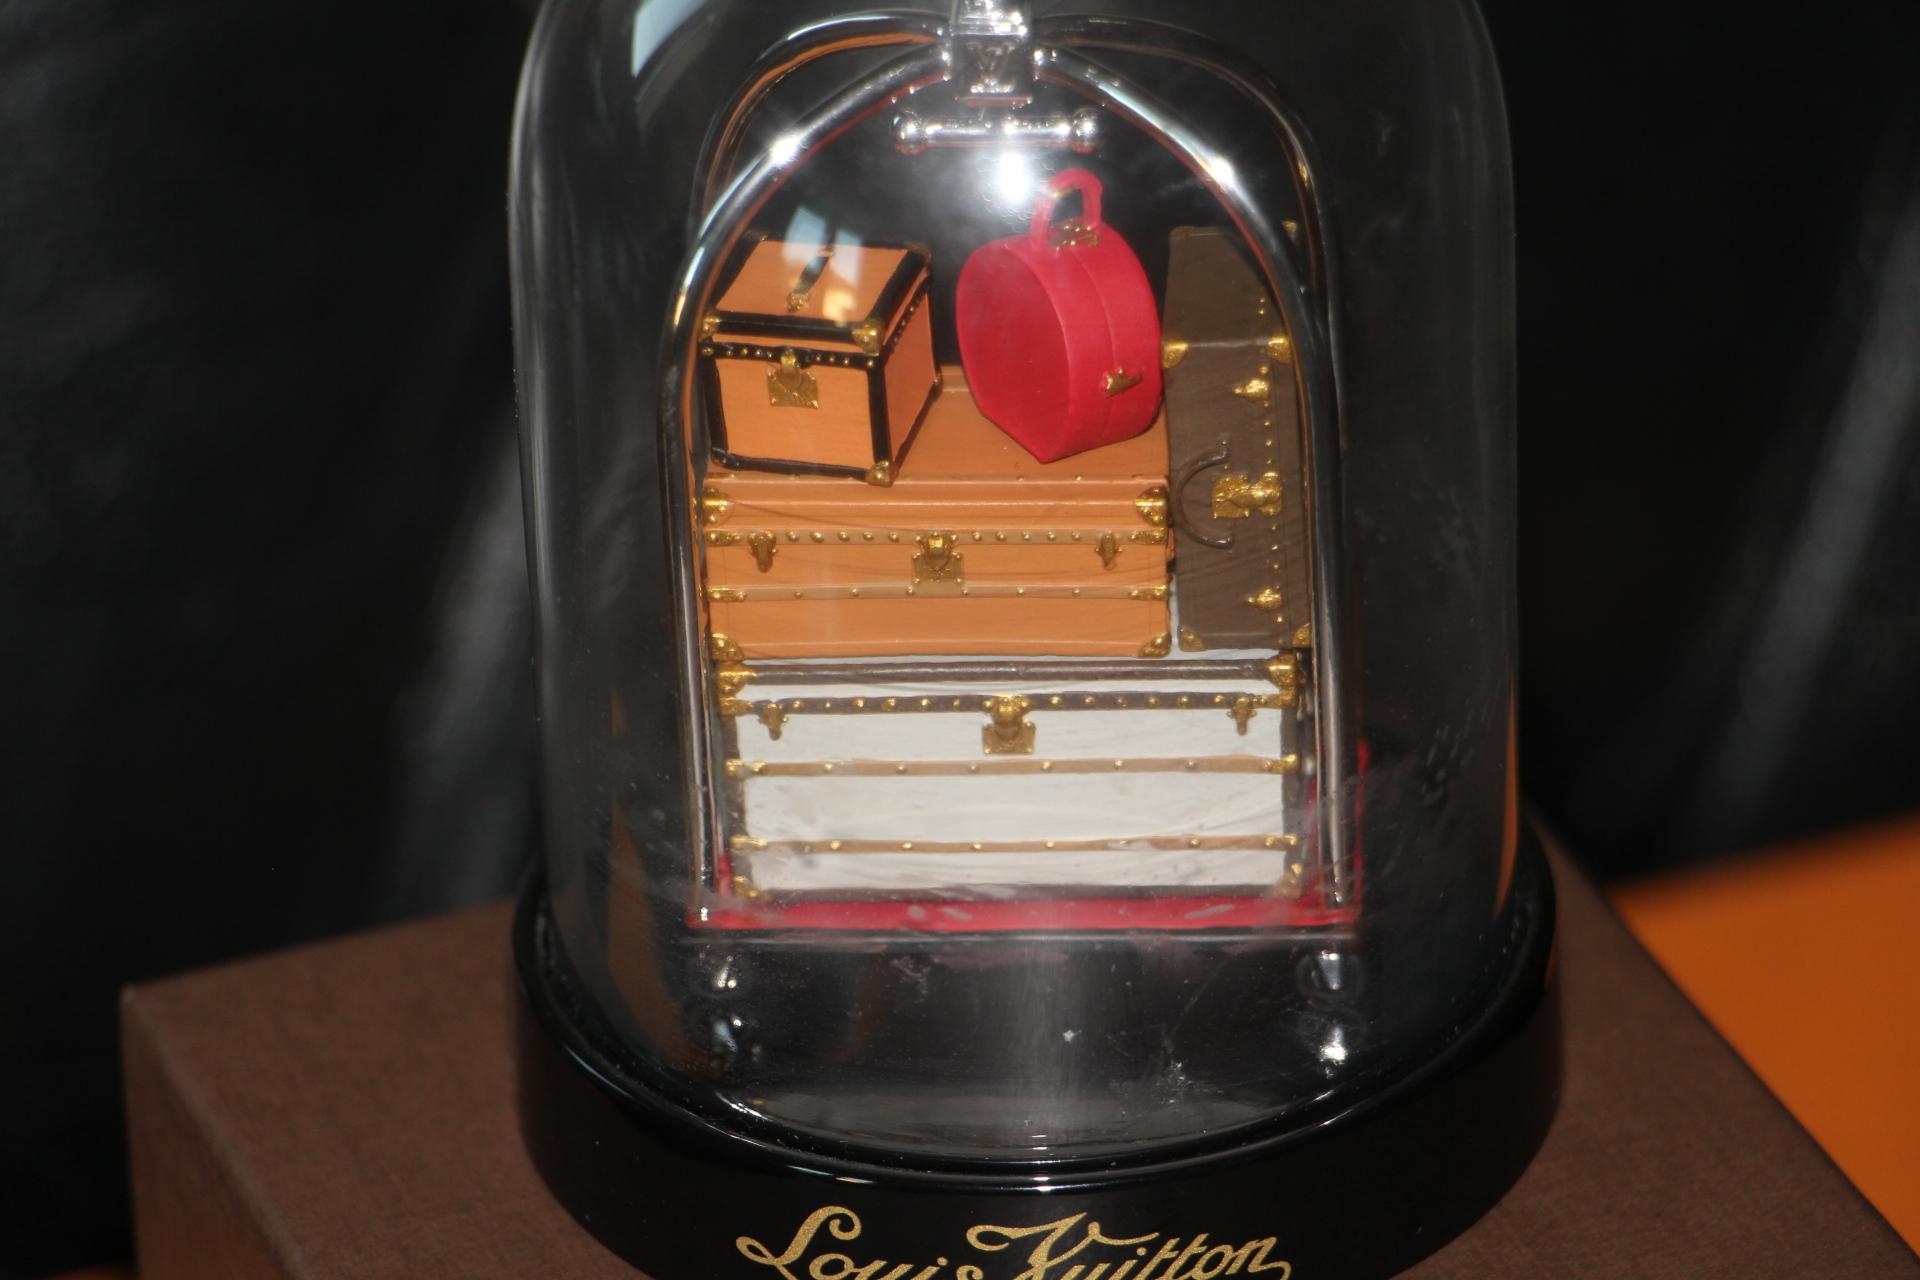 This Louis Vuitton VIP Trunk Bag Trolley Snow Globe was commissioned in 2010, extremely limited, a collector's item..
It features a porter trolley with various Vuitton suitcase, as well as hat trunks and steamer trunks . 
It is a very limited